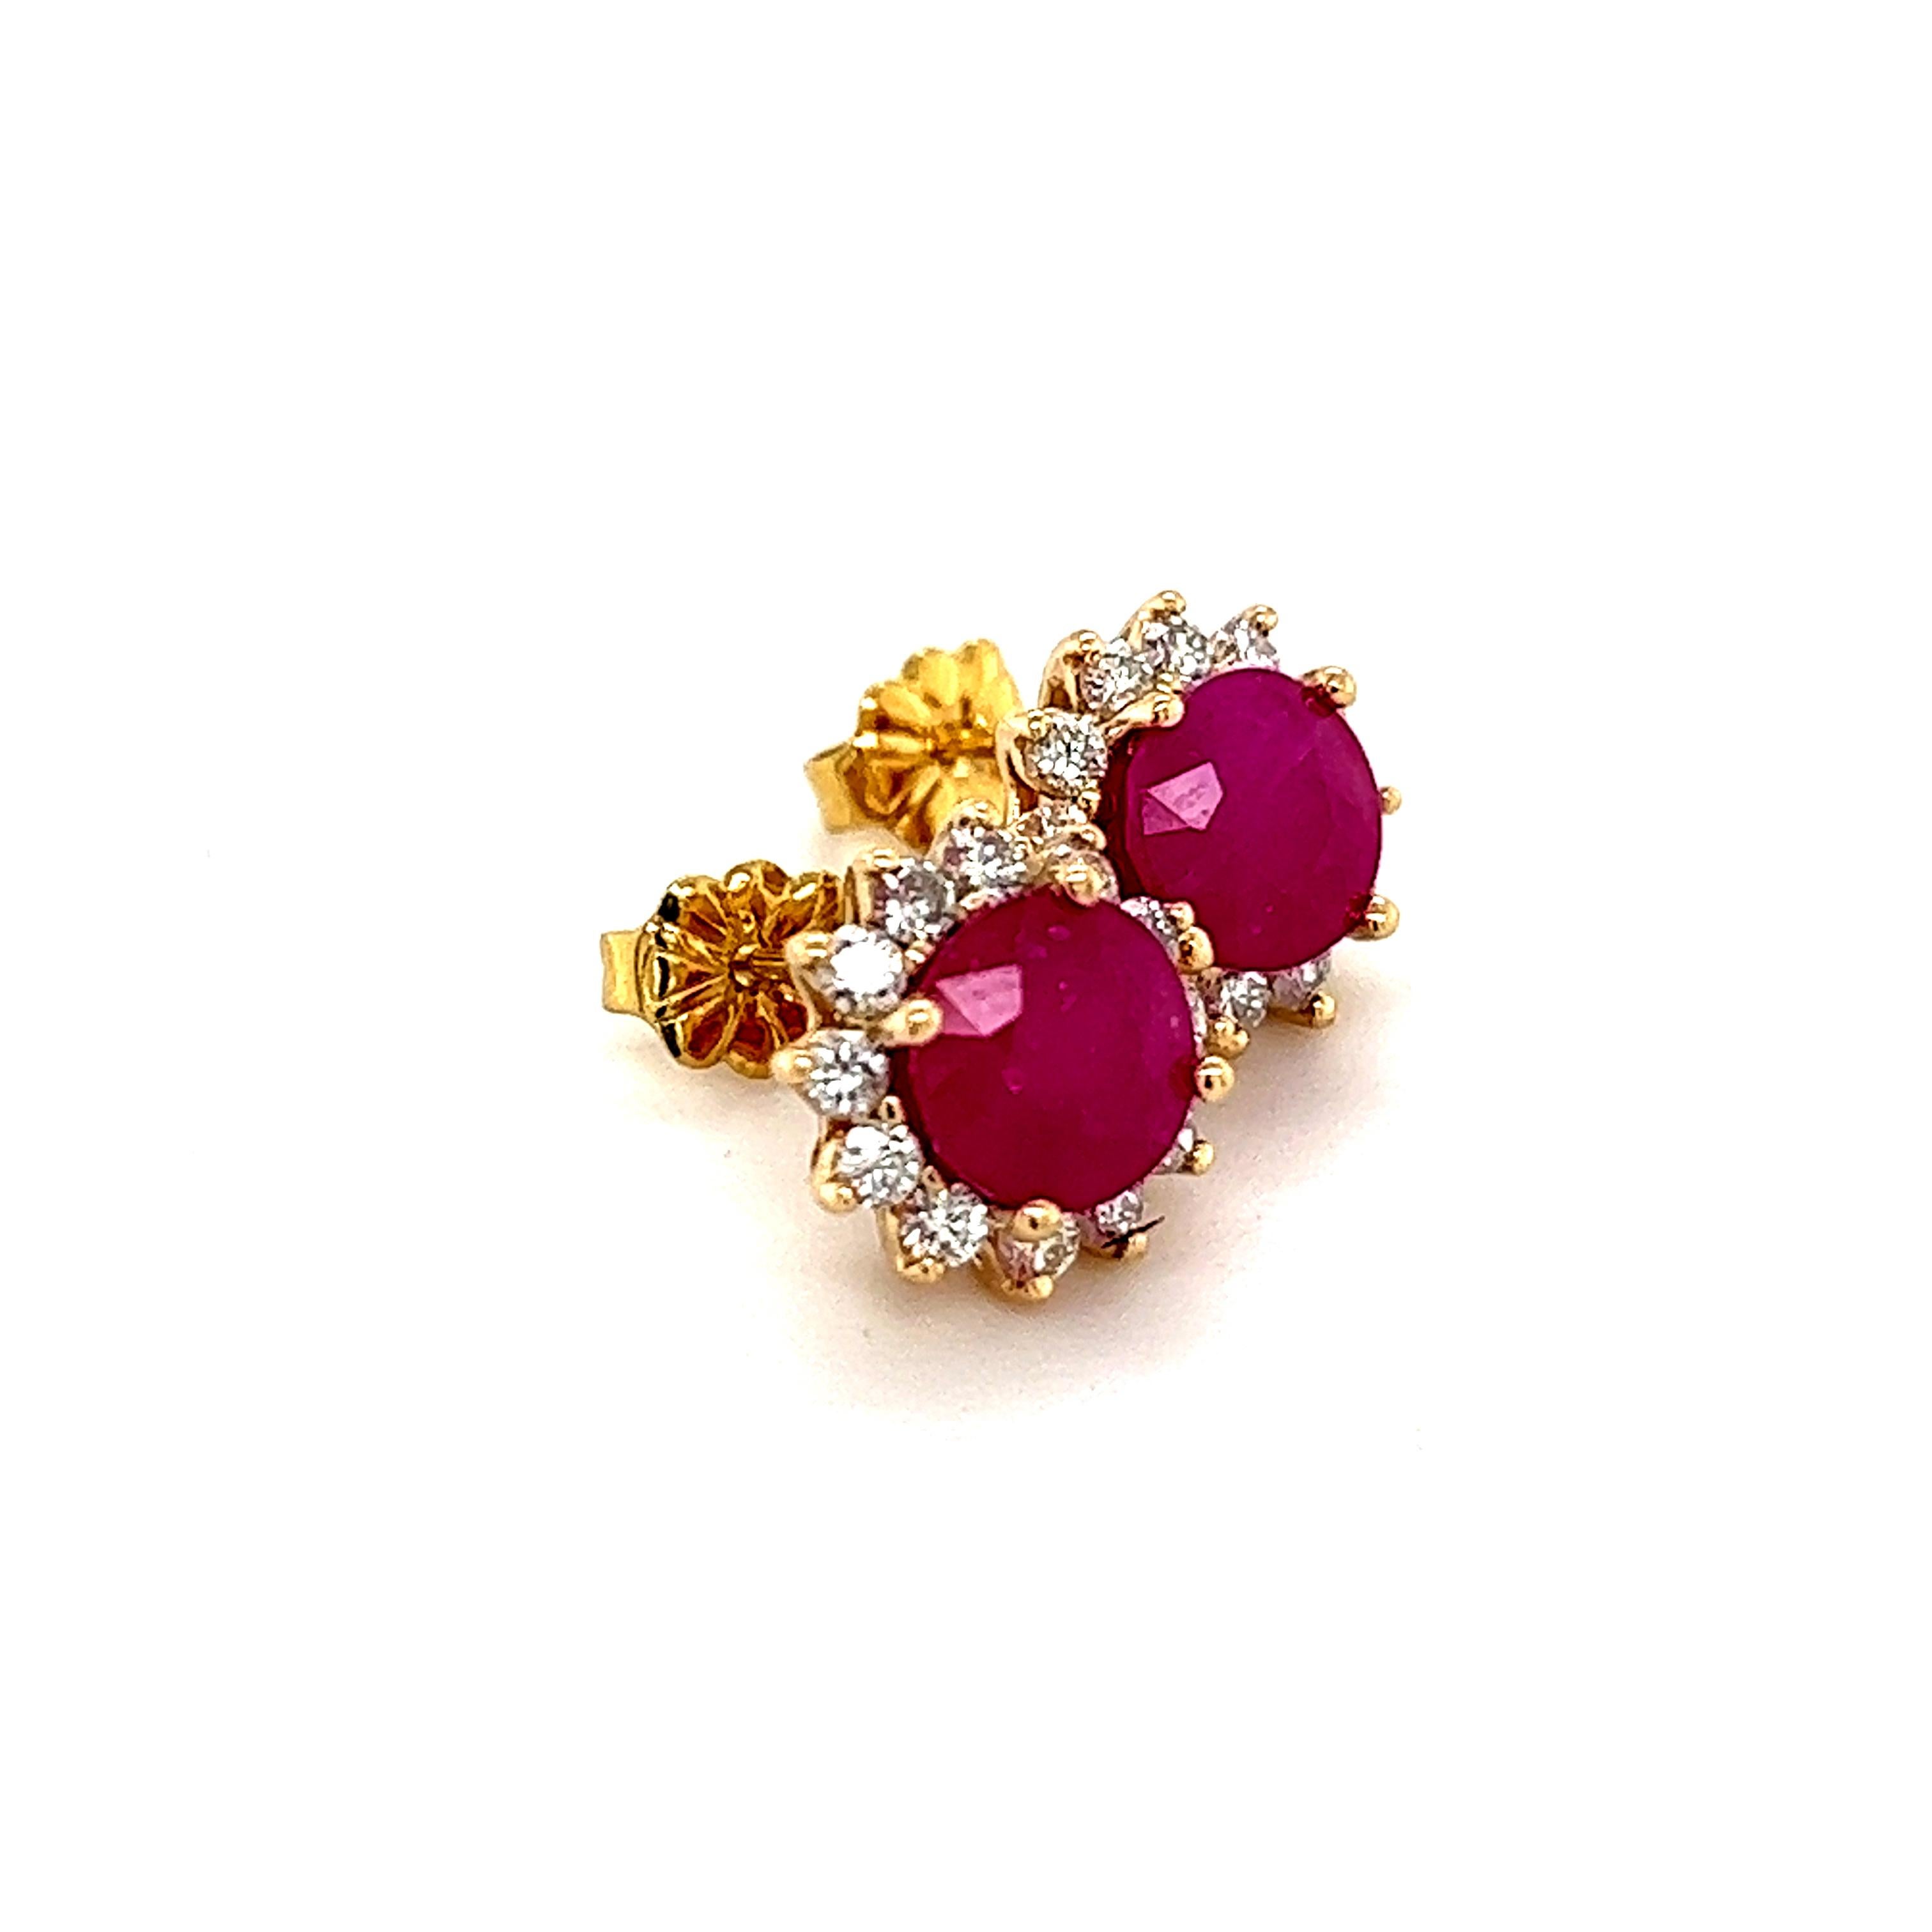 Natural Ruby Diamond Earrings 14k Gold 3.72 TCW Certified For Sale 1